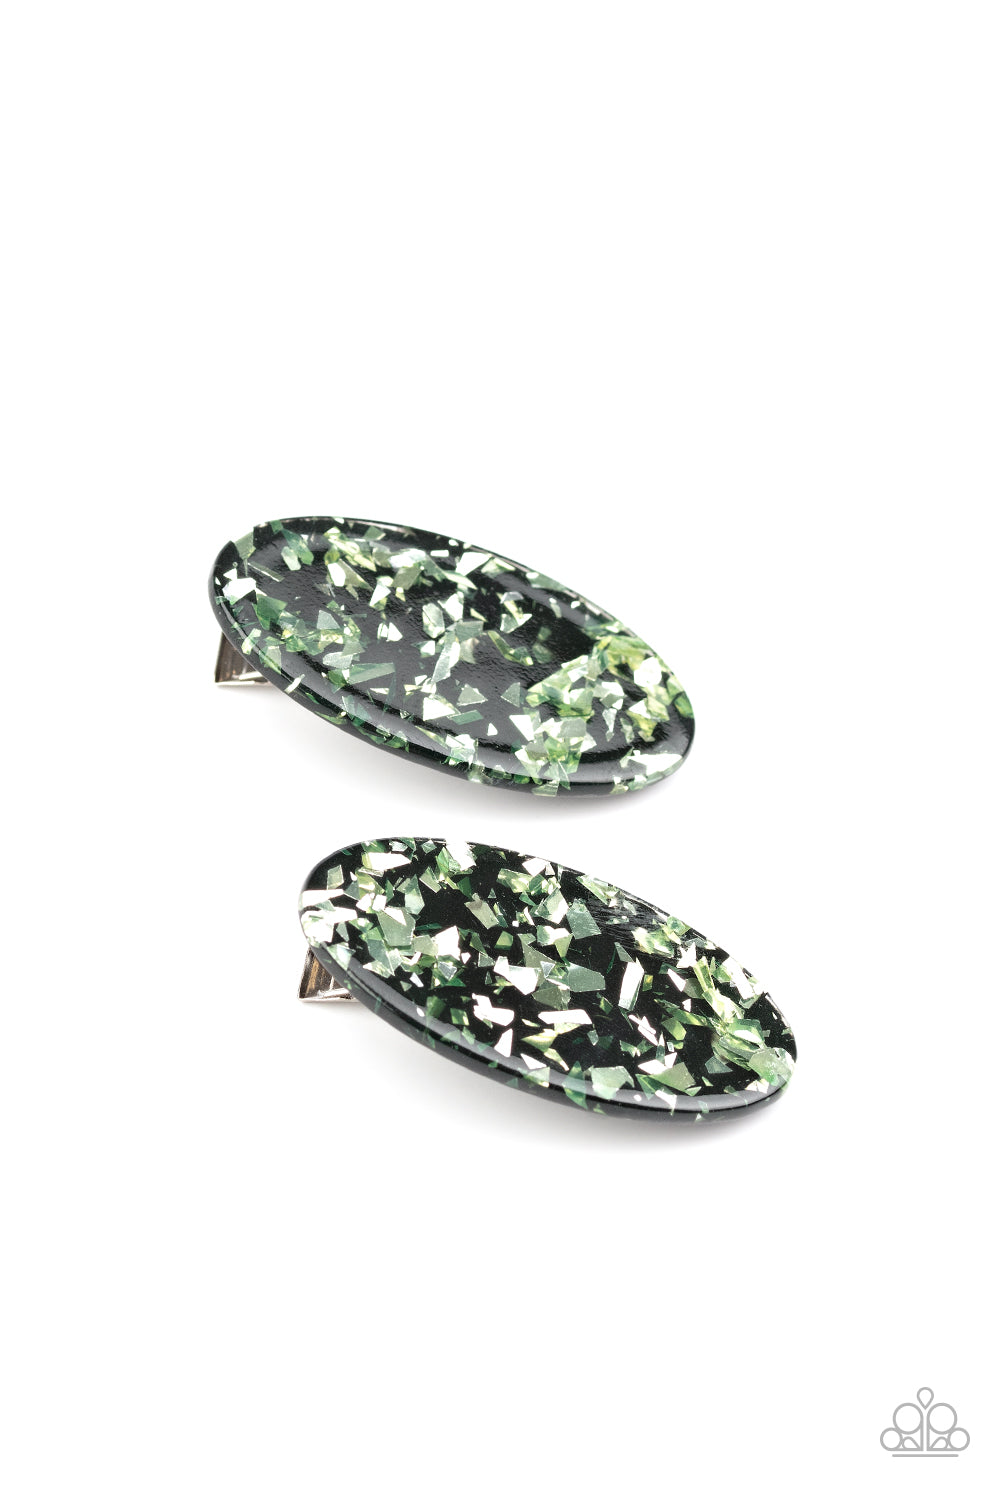 Paparazzi Hair Clips - Featuring green iridescent flecks, a pair of black oval hair clips pull back the hair for a retro look. Features a standard hair clip on the back. Sold as one pair of hair clips.